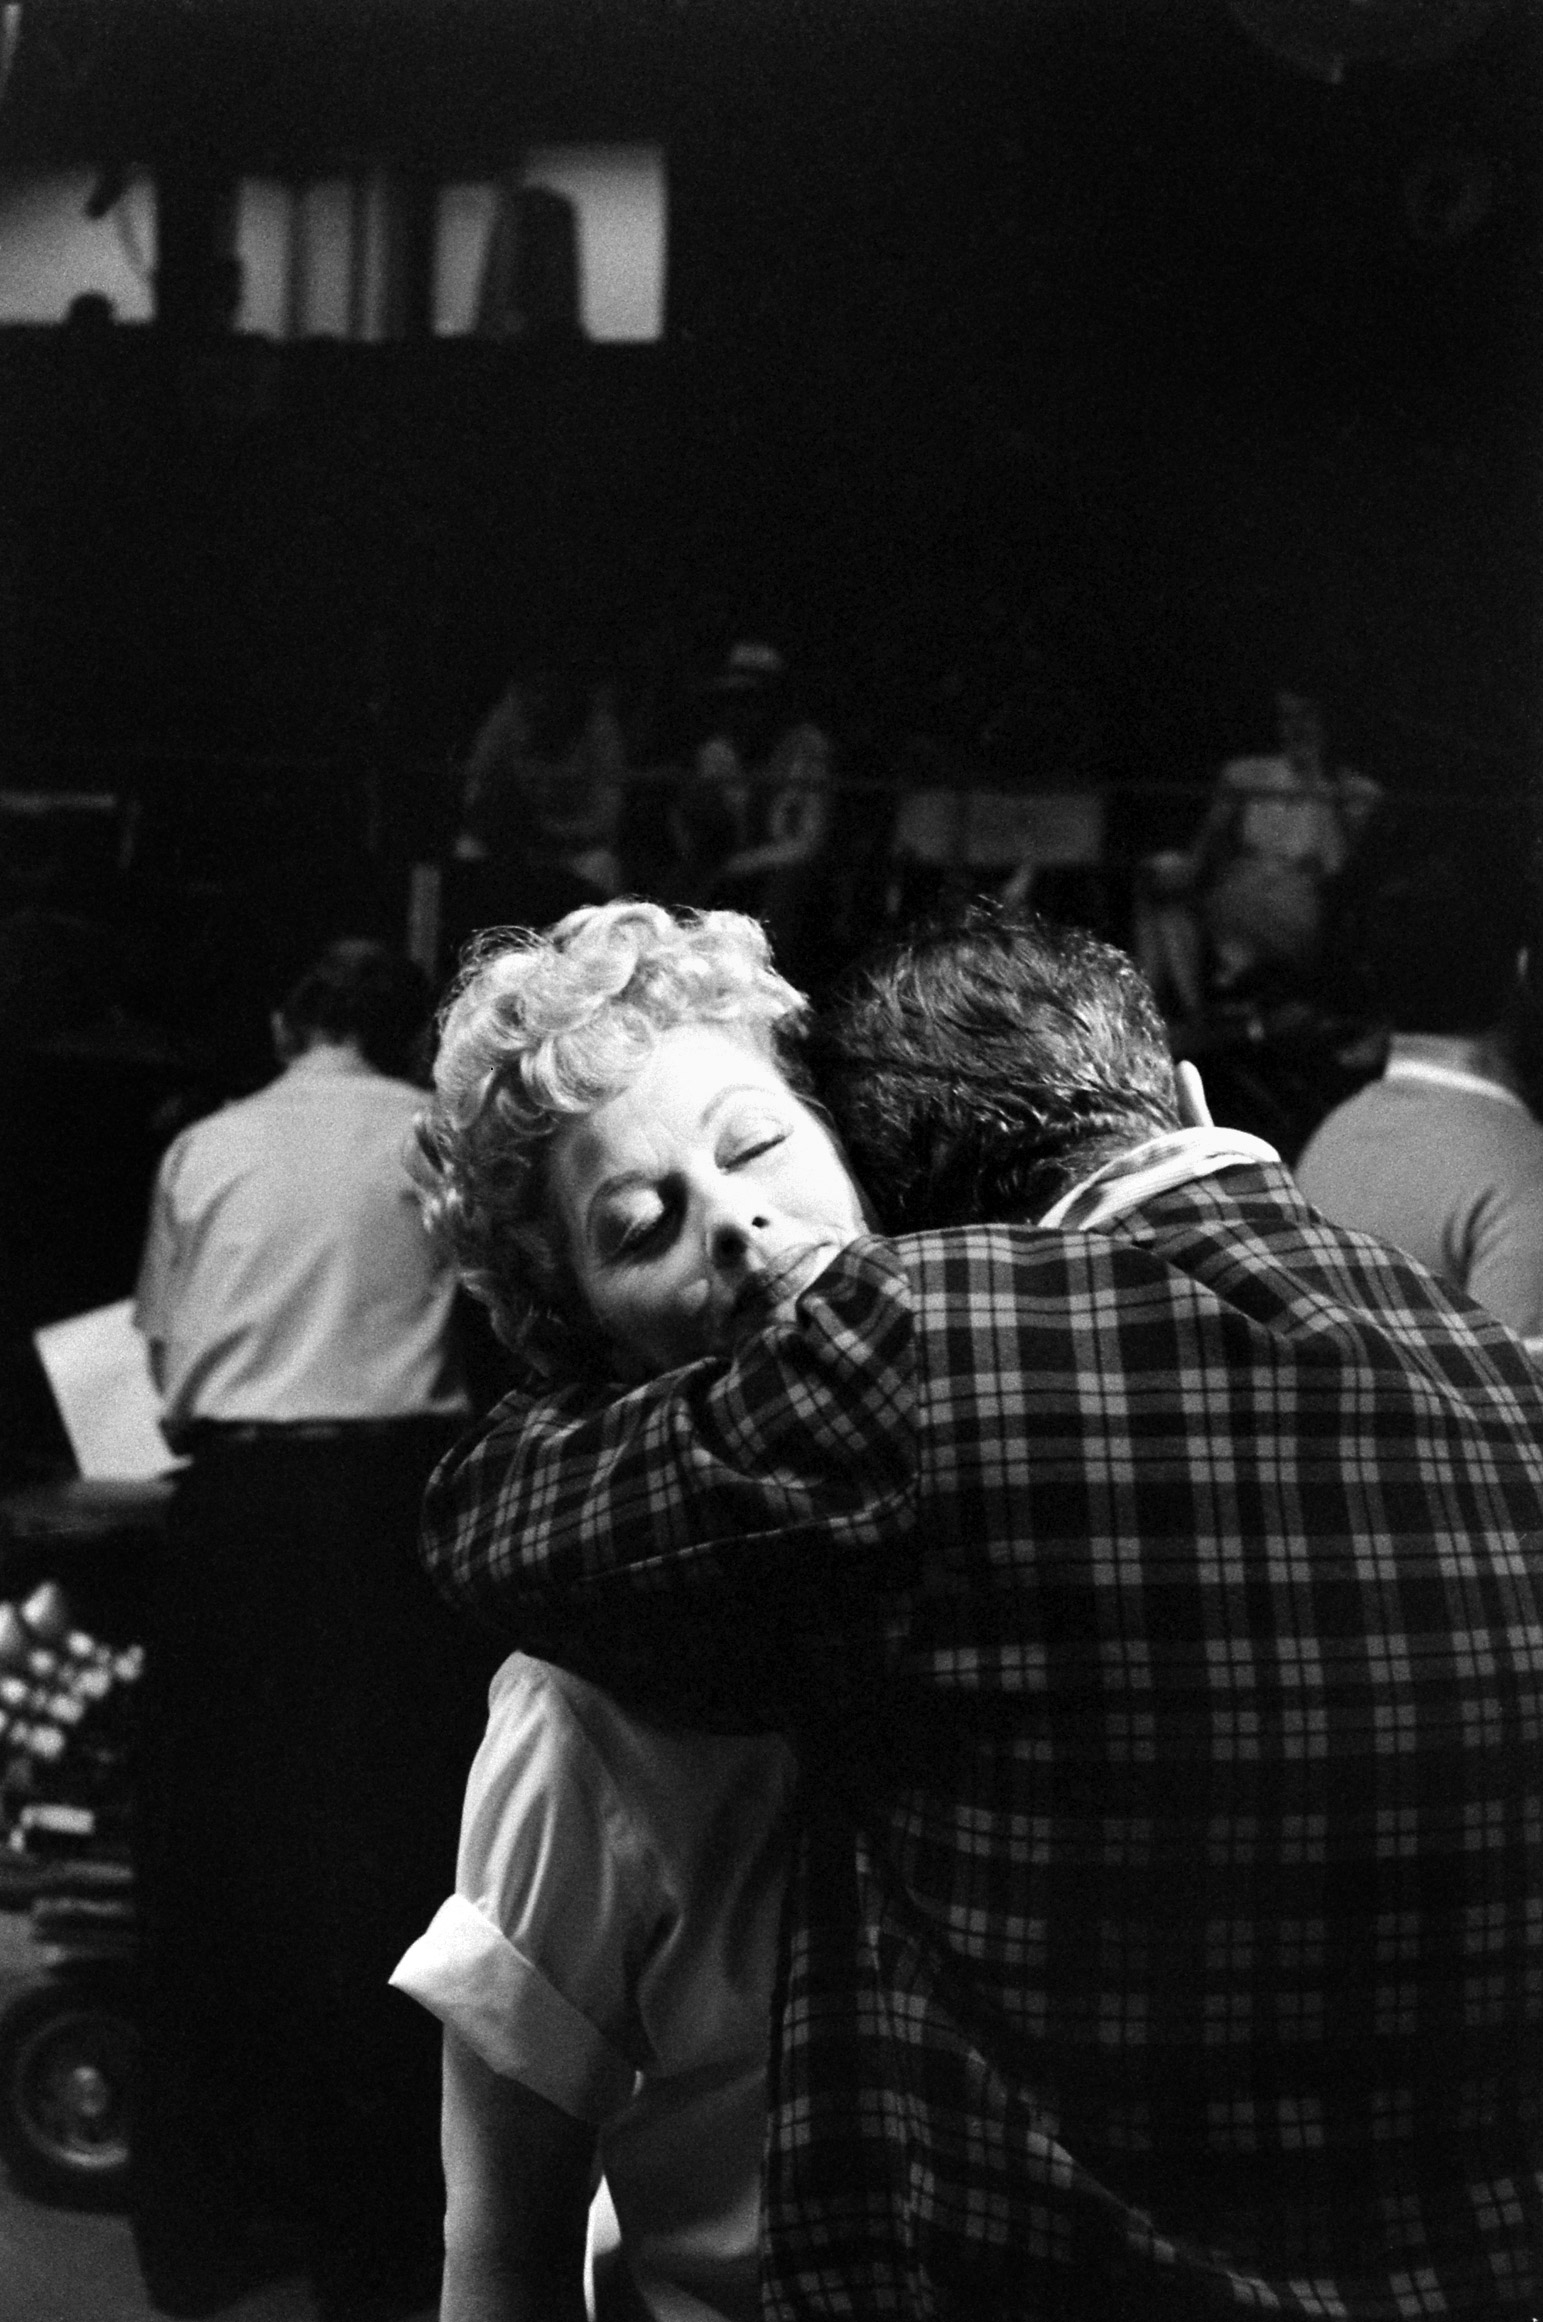 Desi Arnaz embraces Lucille Ball at the new home of their TV production empire, Desilu Studios, 1958.